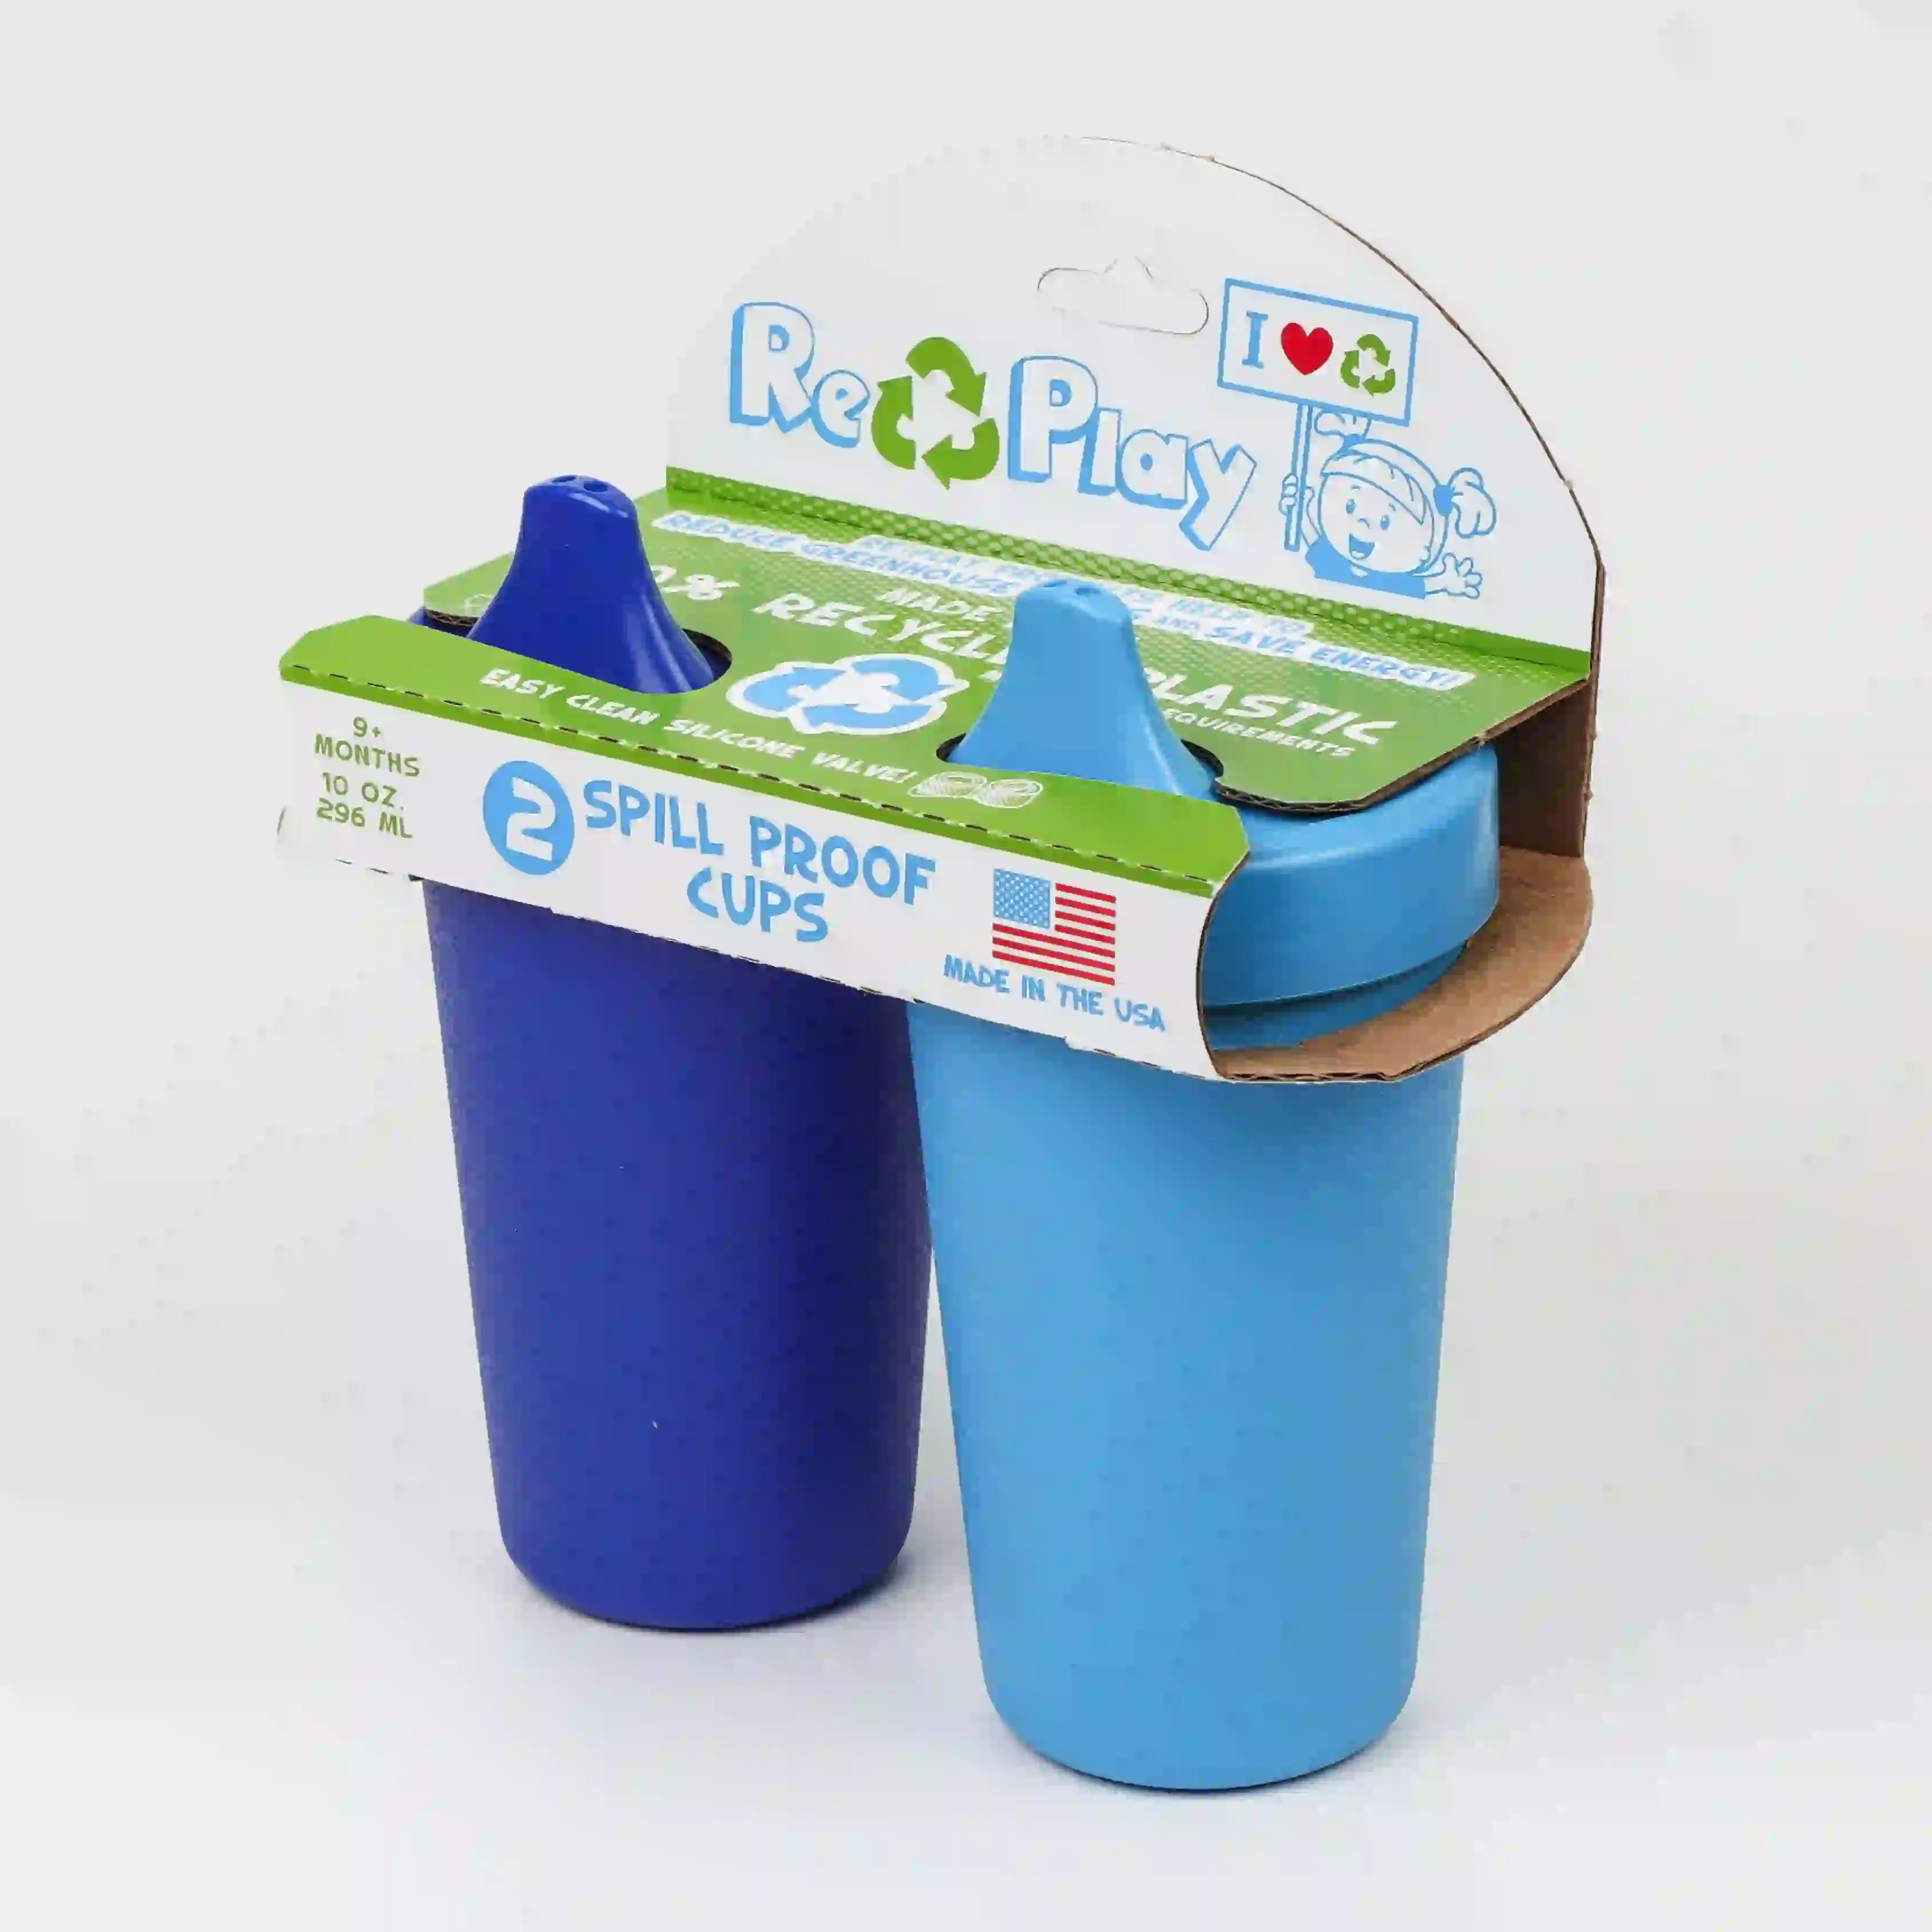 Re-Play - Packaged Spill Proof Cups (True Blue)